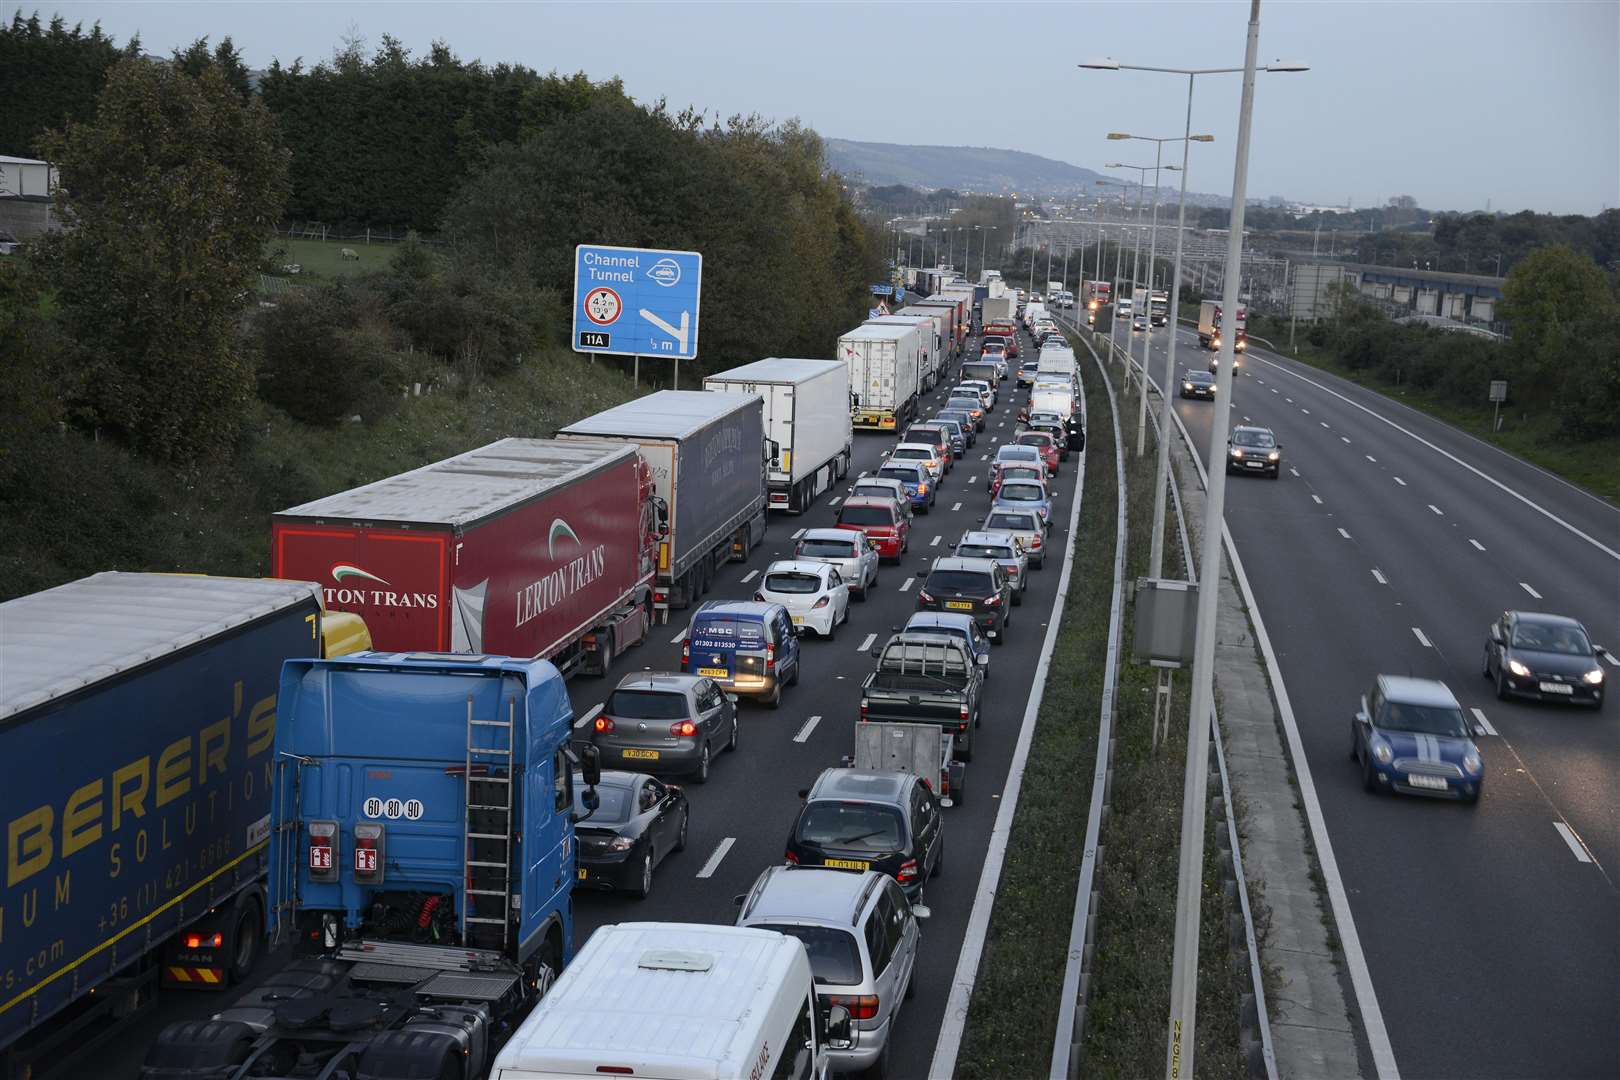 Folkestone M20 motorway closed due to an accident.As nights falls traffic is still at a standstill on coastbound carriagewayPicture: Paul Amos FM4070762 (3666362)